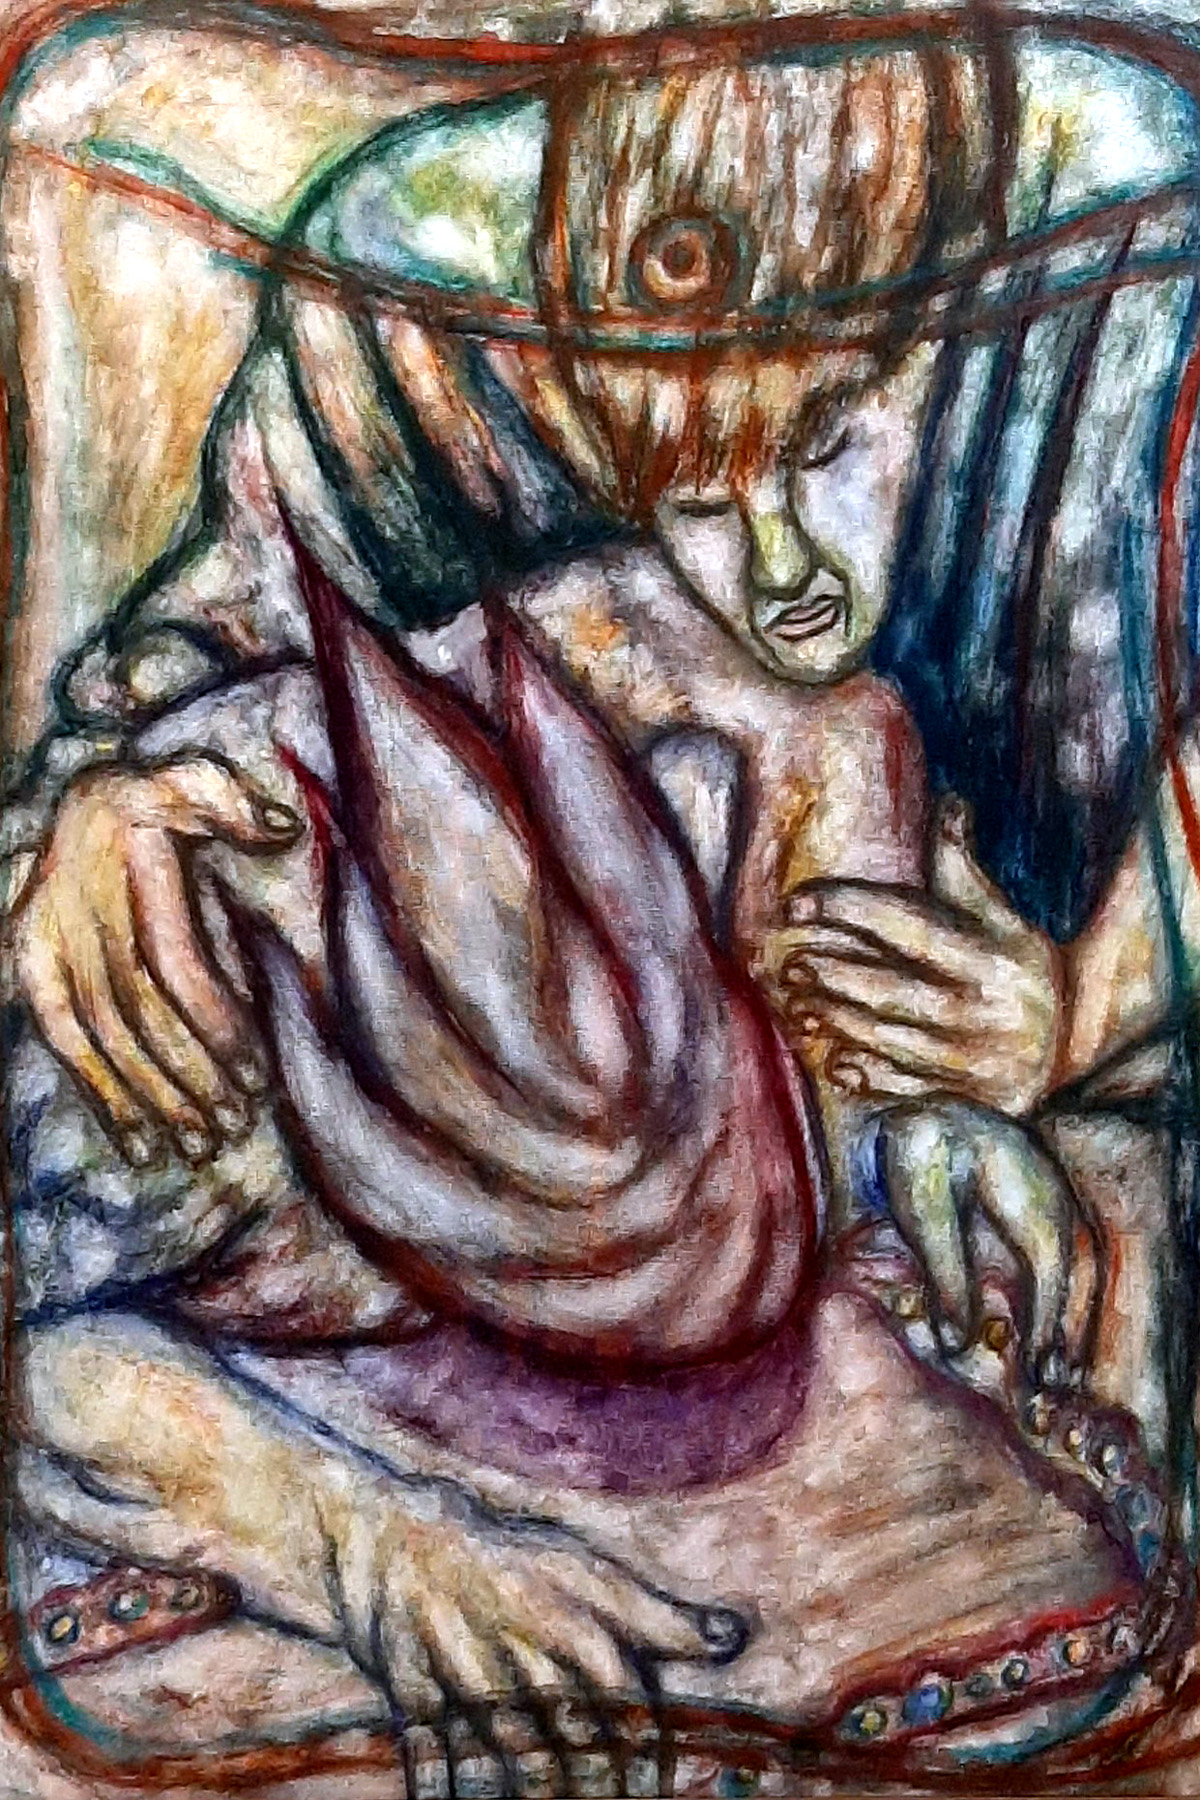 Stephen Mead, 'PocketTwo', 1995, original Watercolor, 18 x 24  inches. Artwork description: 1911  Evocative griefconsolation, incorporated into the series Blue Heart Diary, part of the DVD Captioned Closeness, Indieflix.  com. ...